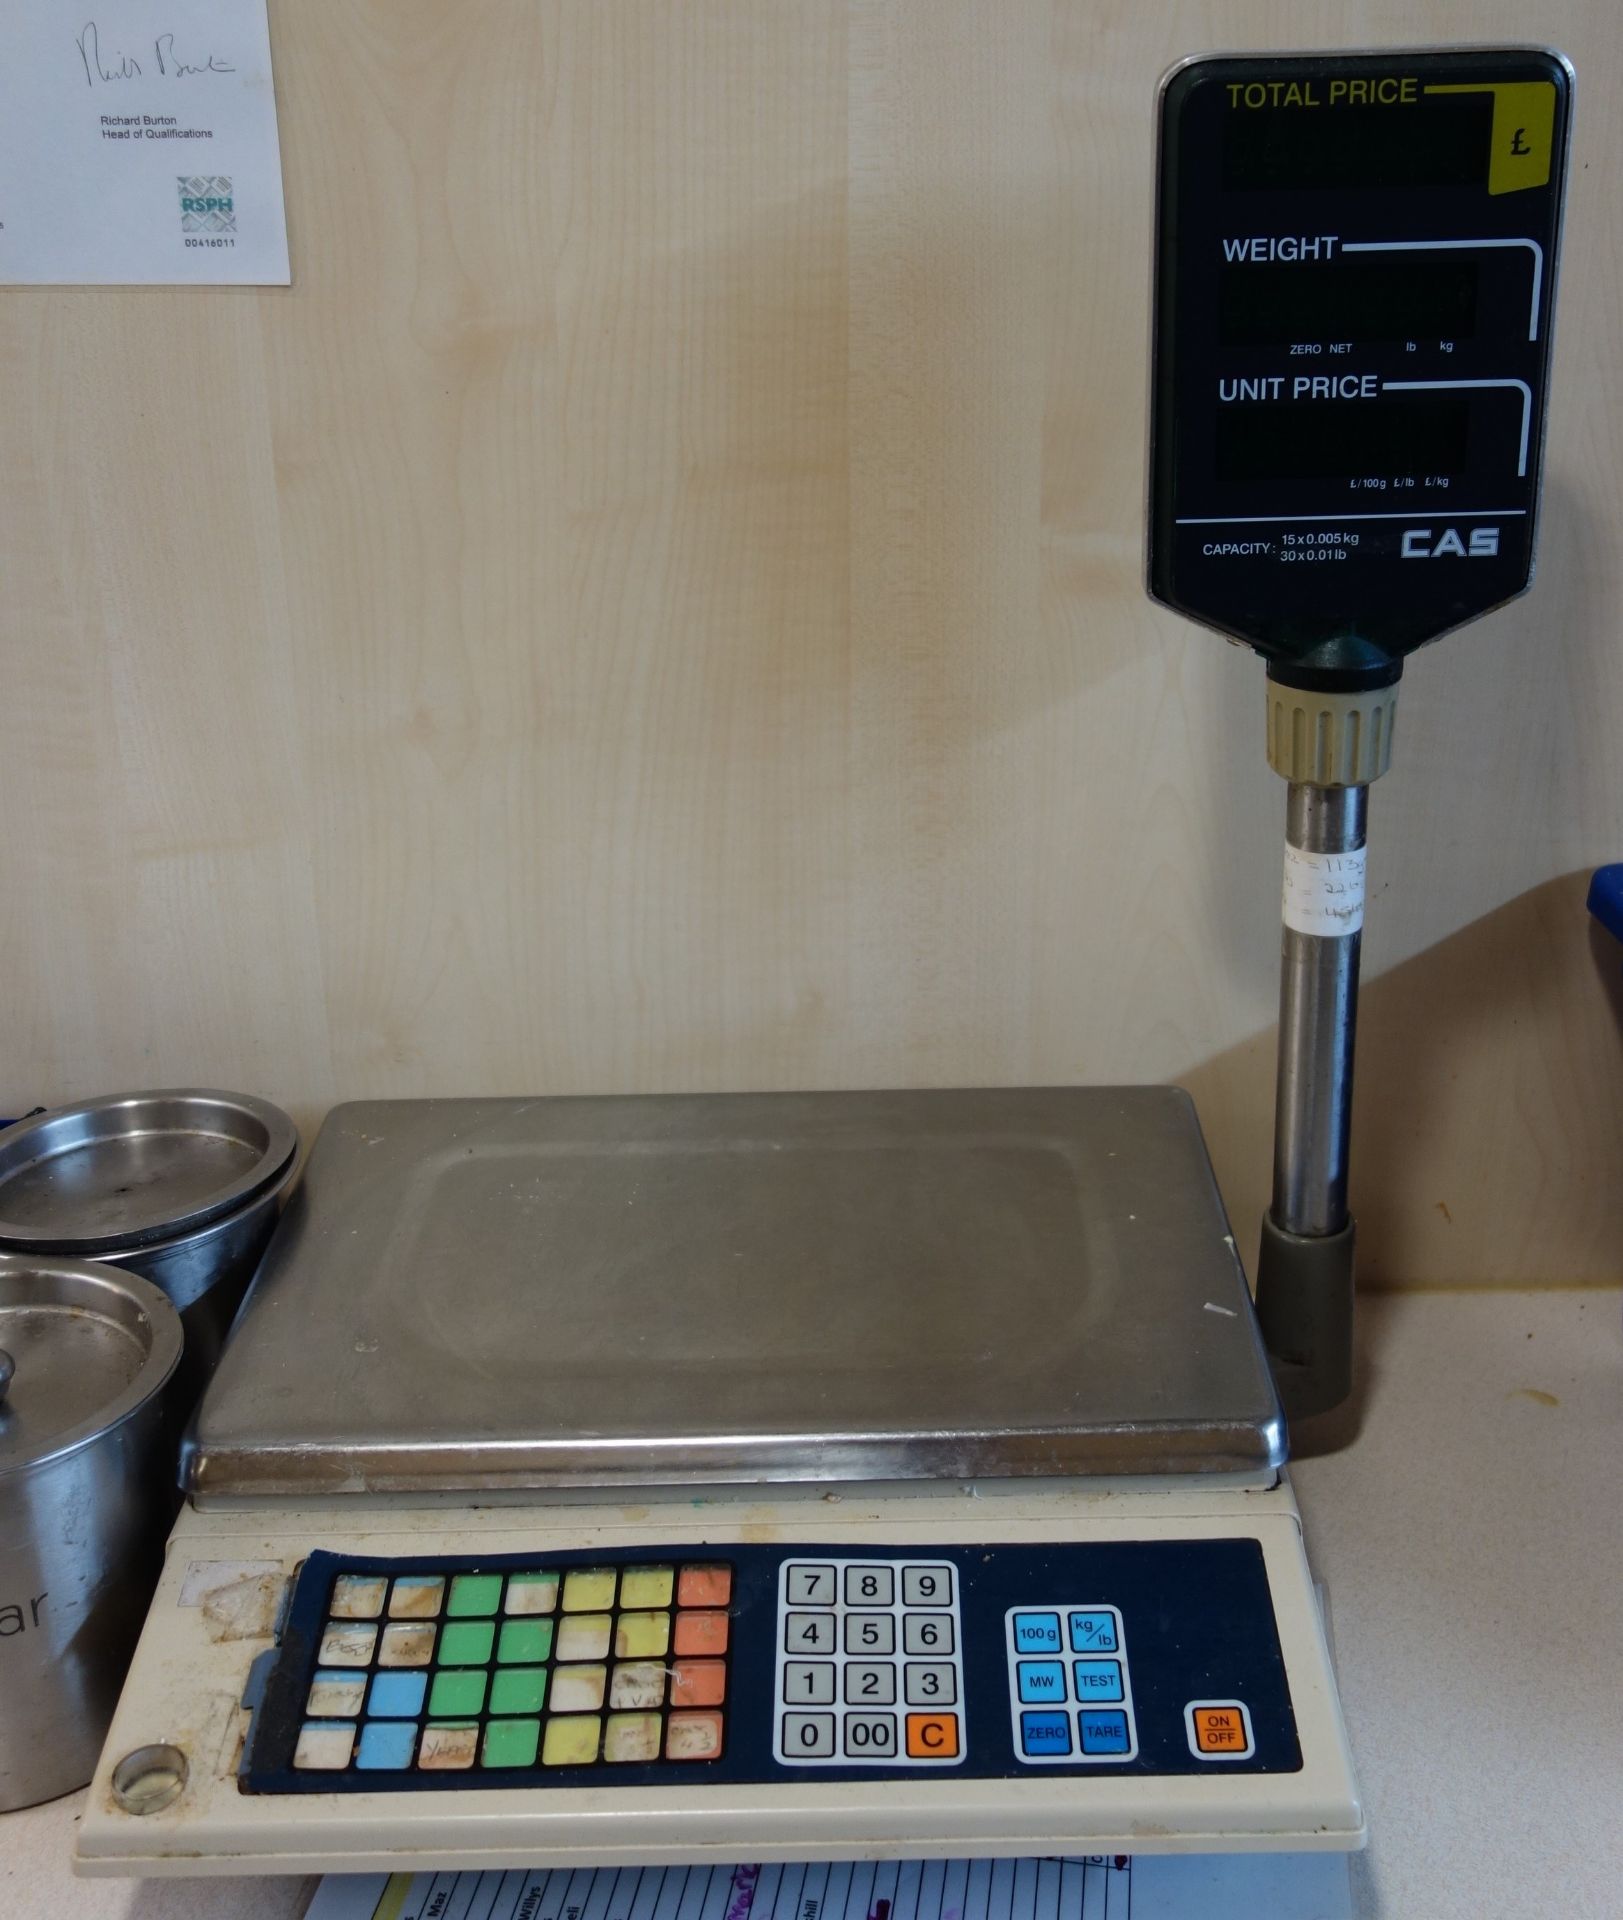 Electric shop counter weighing scales and 'Sauter' commercial floor standing weighing scales